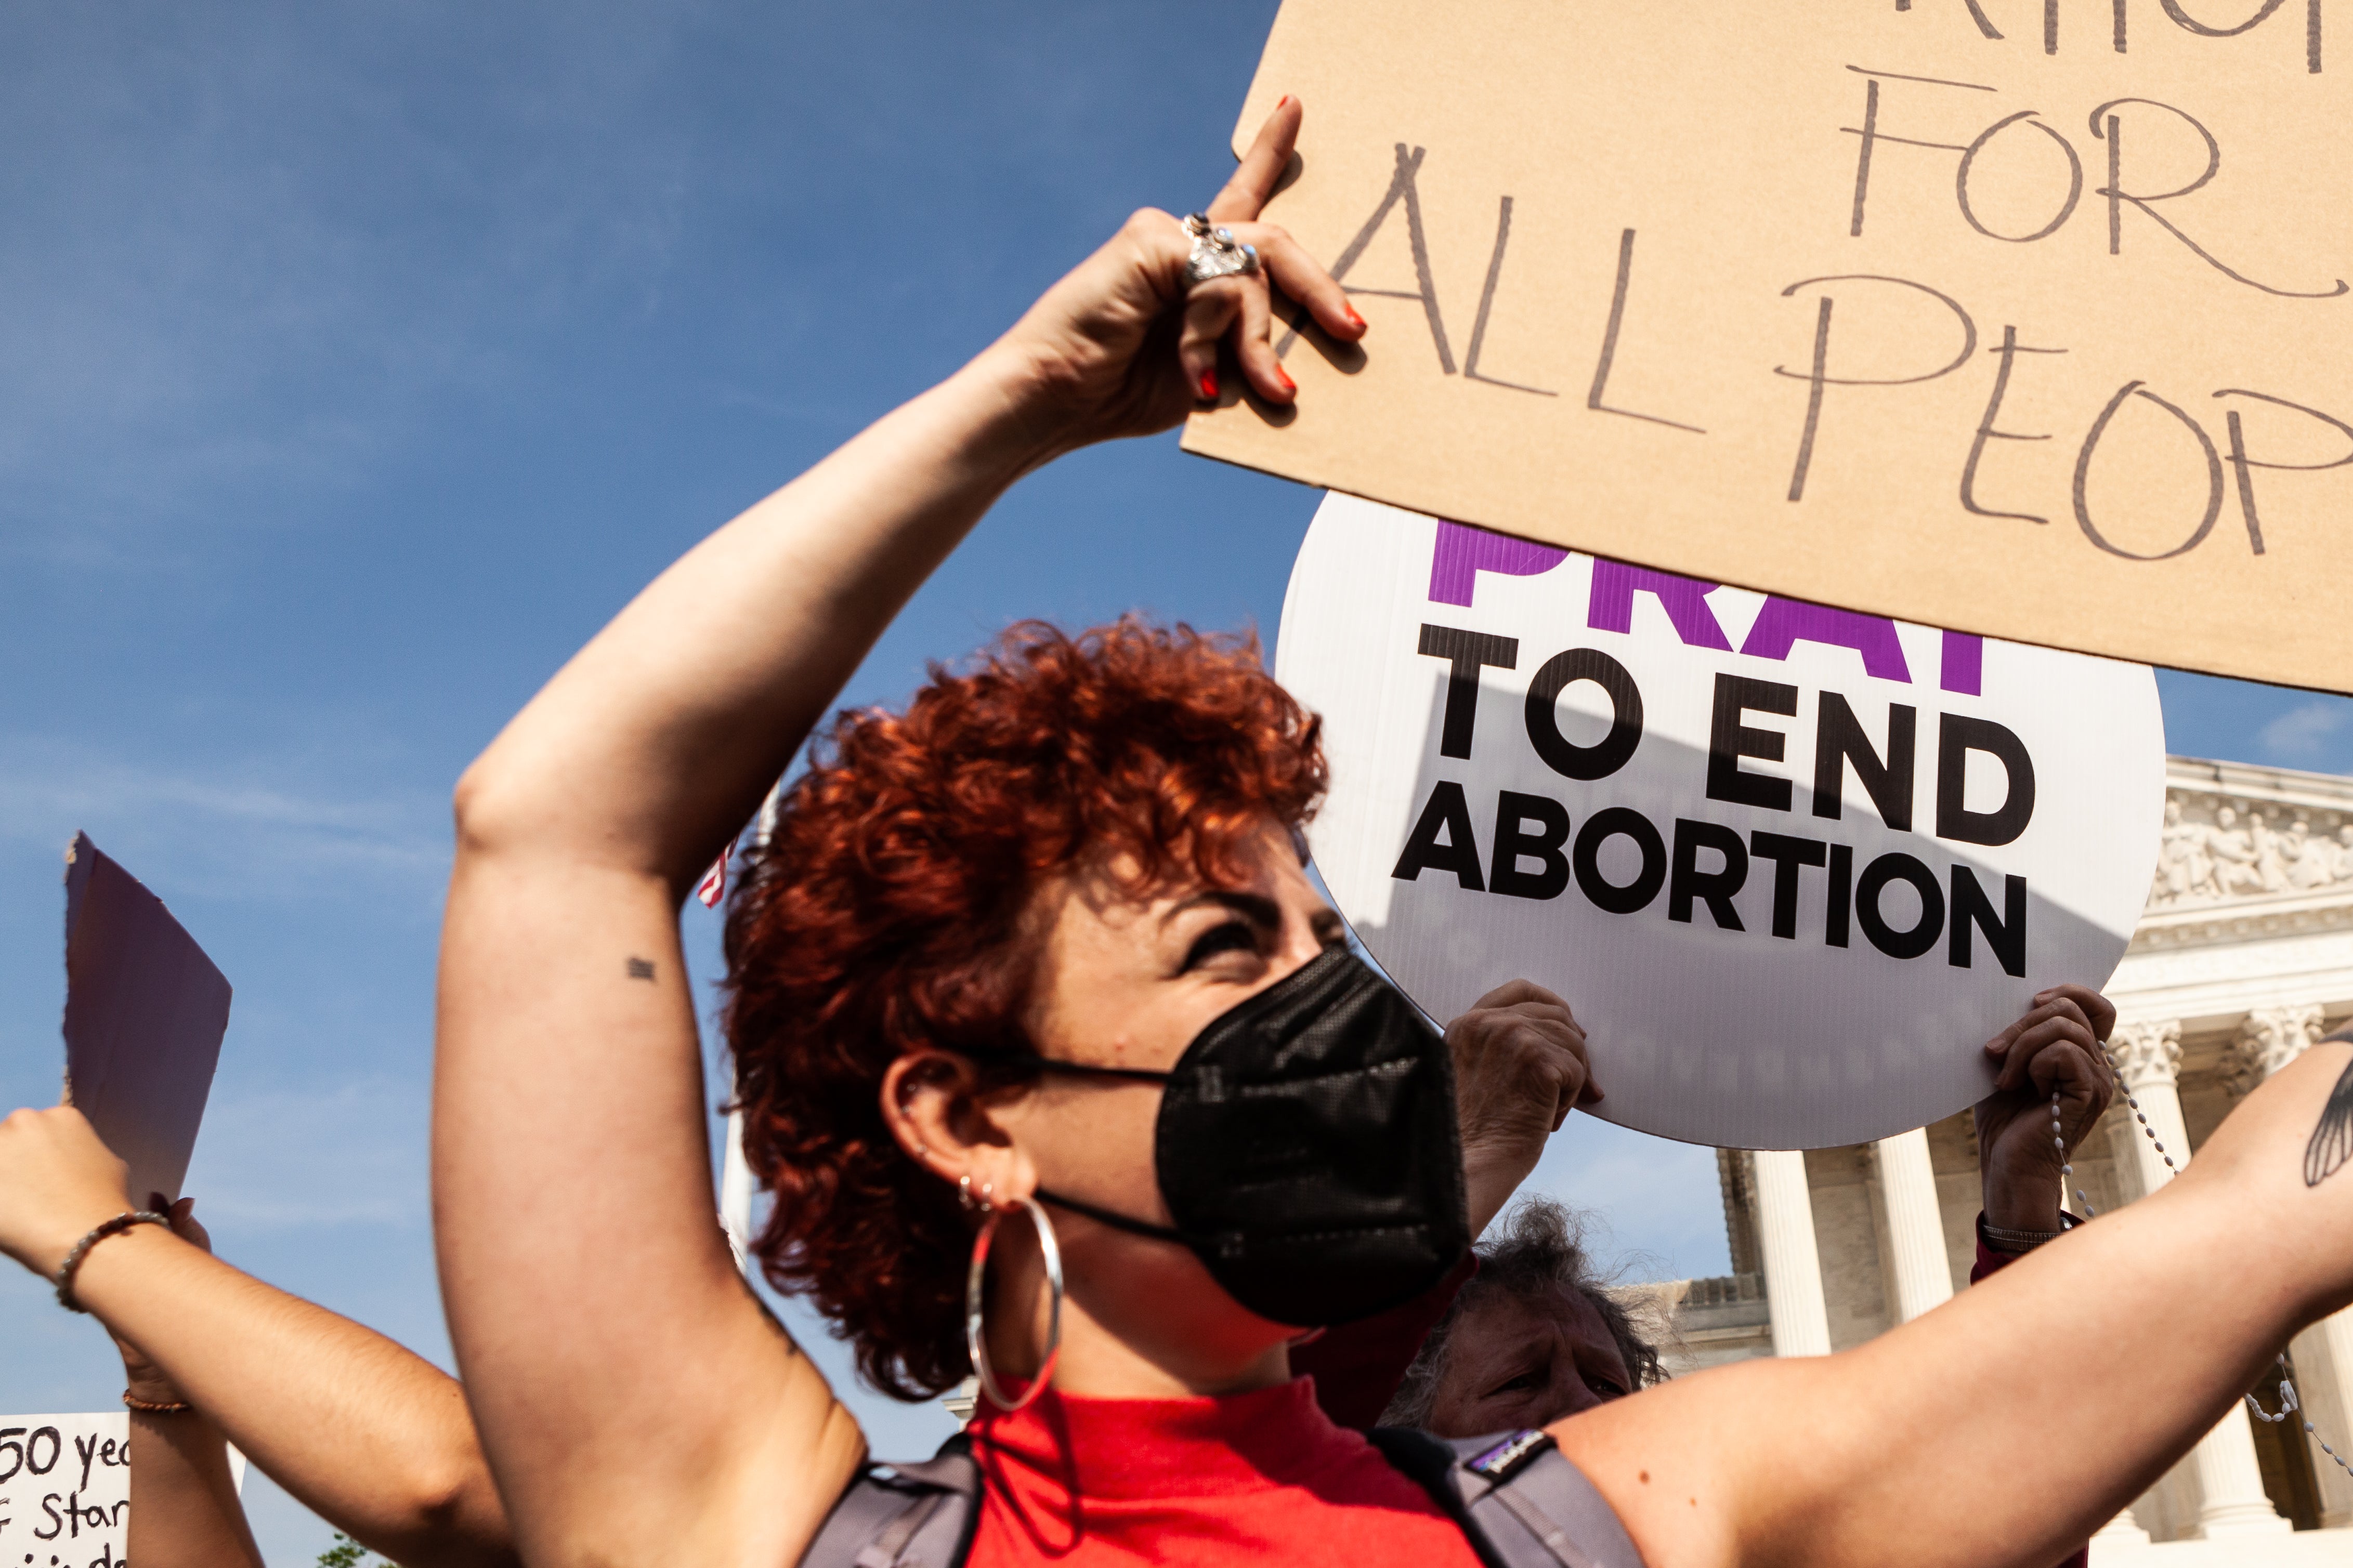 A pro-choice protester holds a sign in front of an anti-abortion protester holding a sign that says "Pray to End Abortion" outside the Supreme Court.